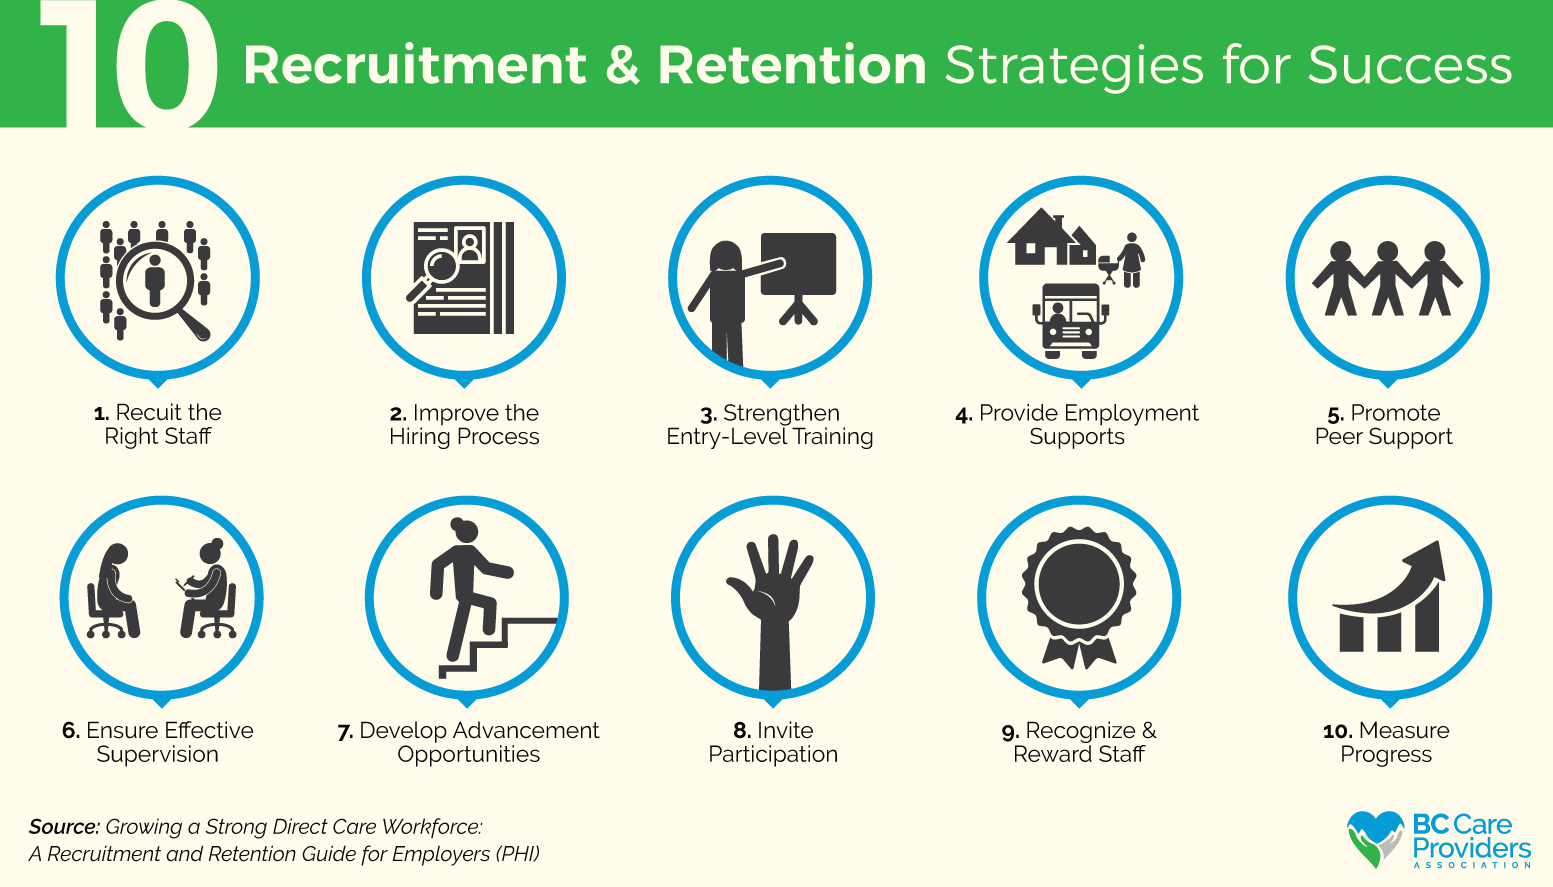 Candidate referrals 10 times more effective than online job advertising